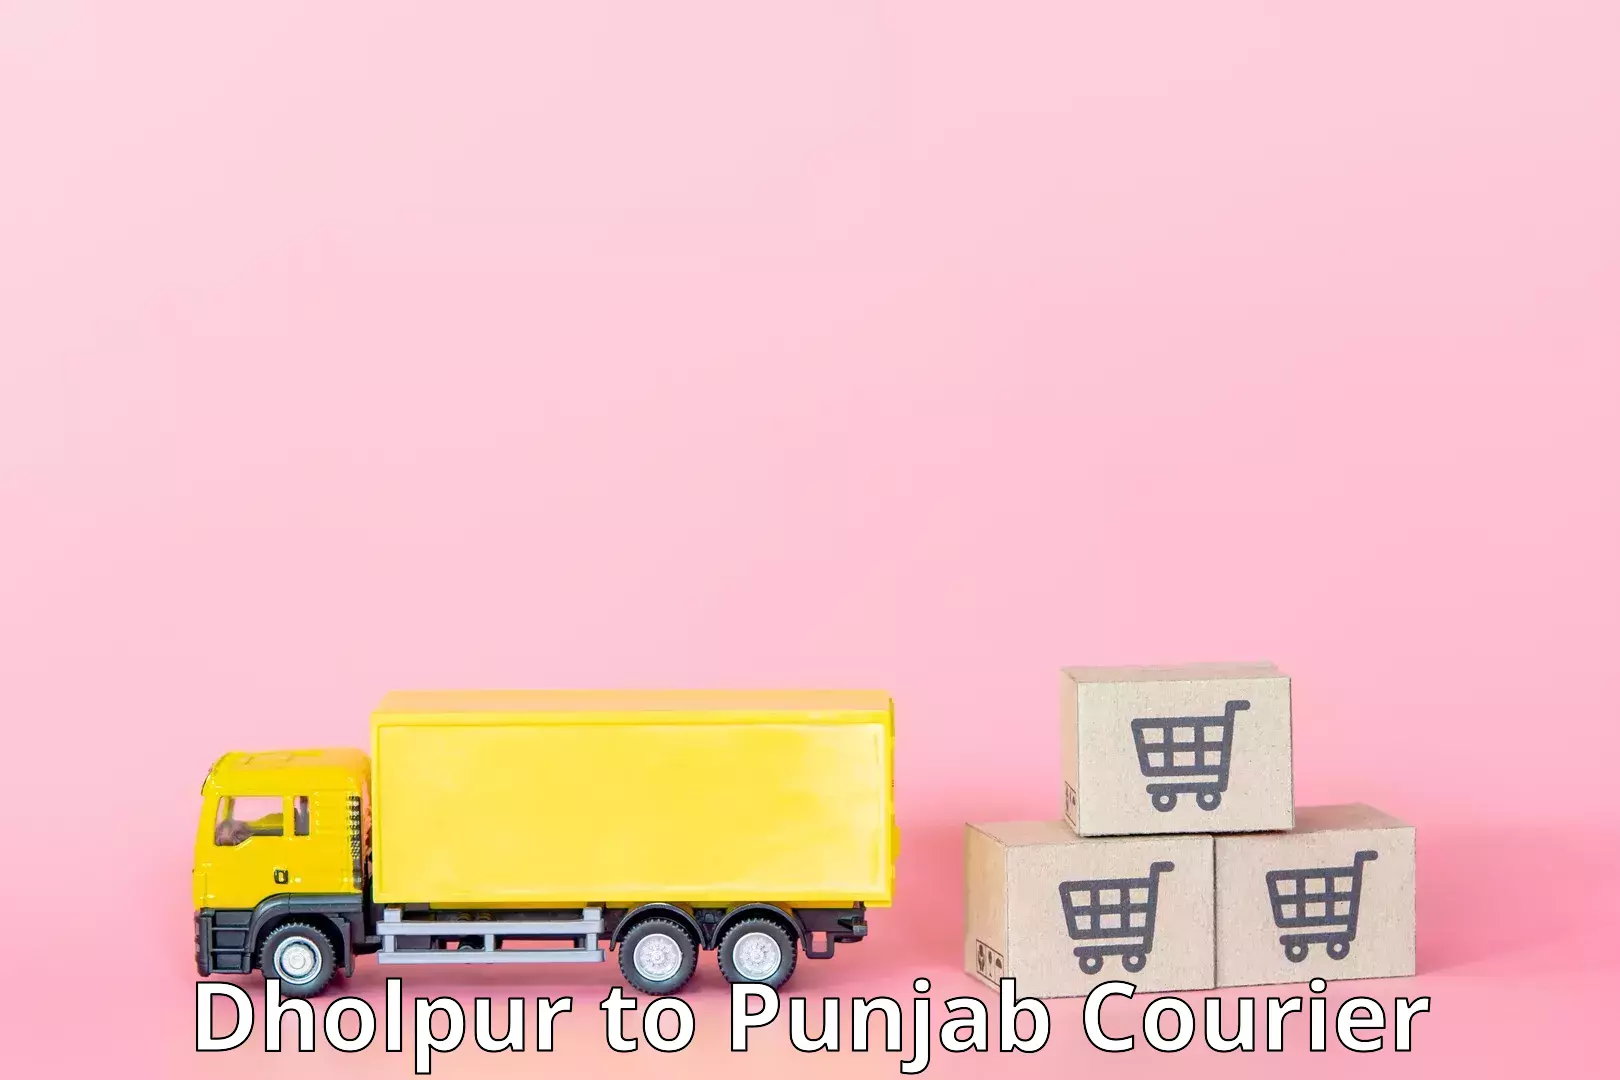 24-hour courier service Dholpur to Malerkotla